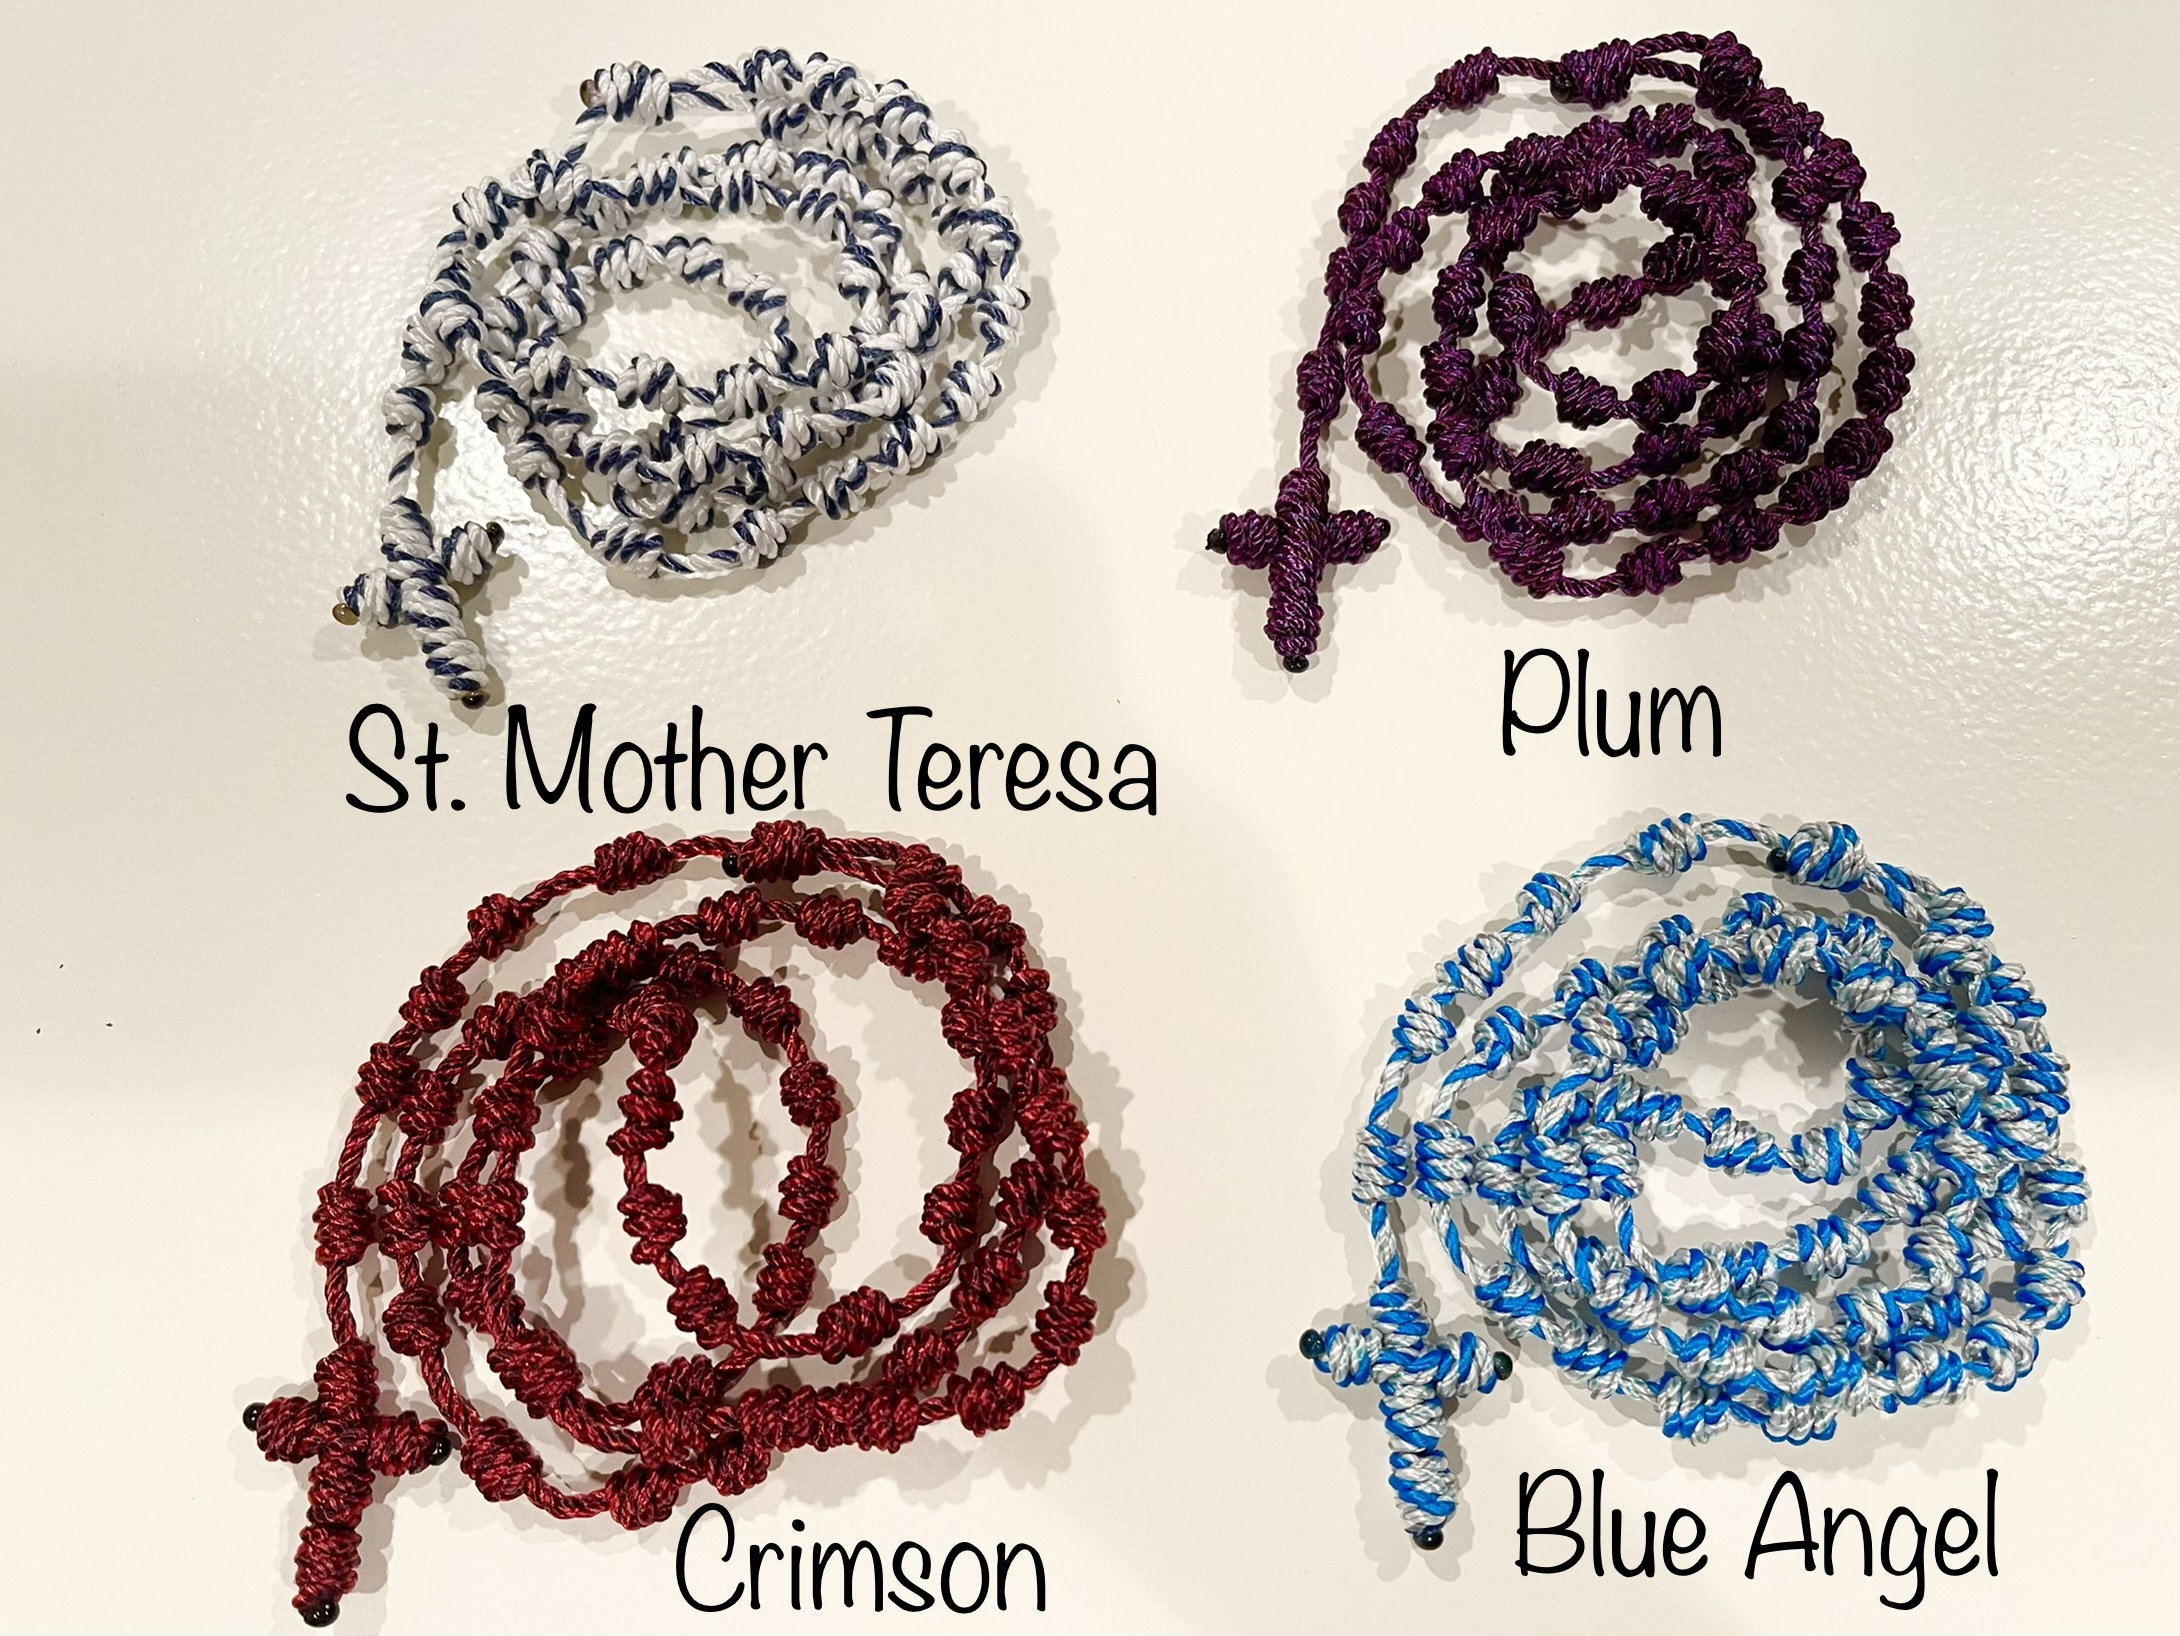 Twine by Design #36 3-Strand Twisted Rosary Twine - Excellent Quality Twine  for Crafts, DIY Projects, Rosaries (Desert Camo)